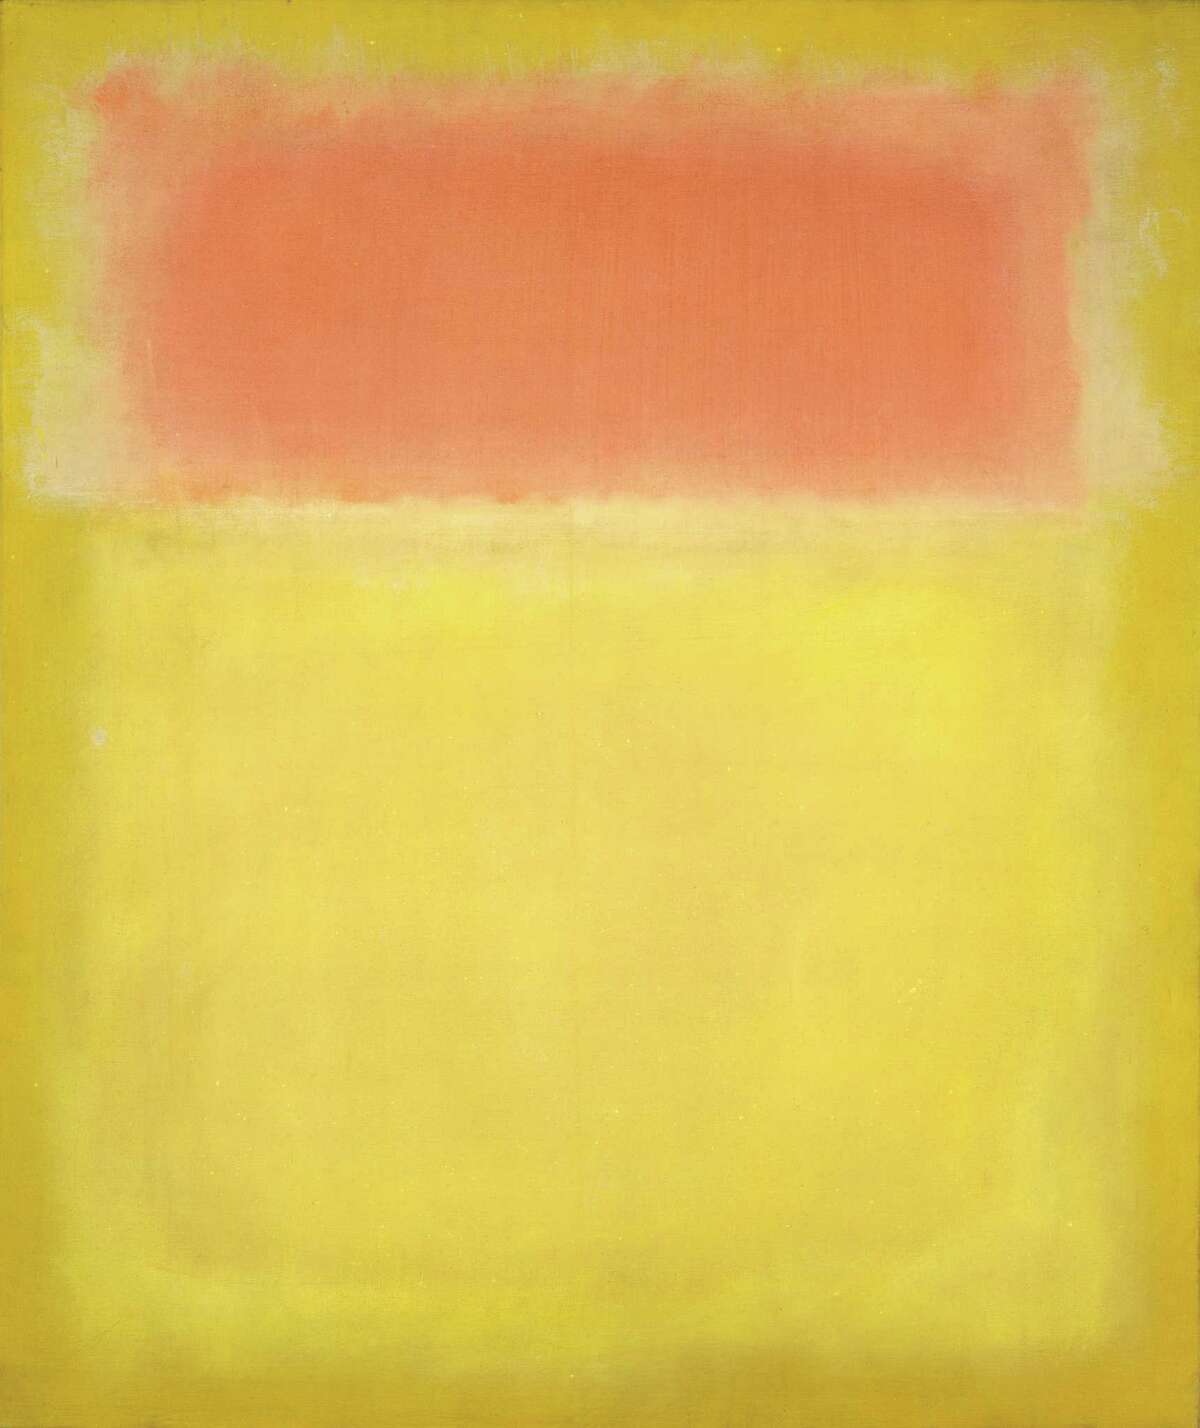 Among works on view through Jan. 24 in the exhibition "Mark Rothko: A Retrospective" at the Museum of Fine Arts, Houston is this untitled canvas from 1951.